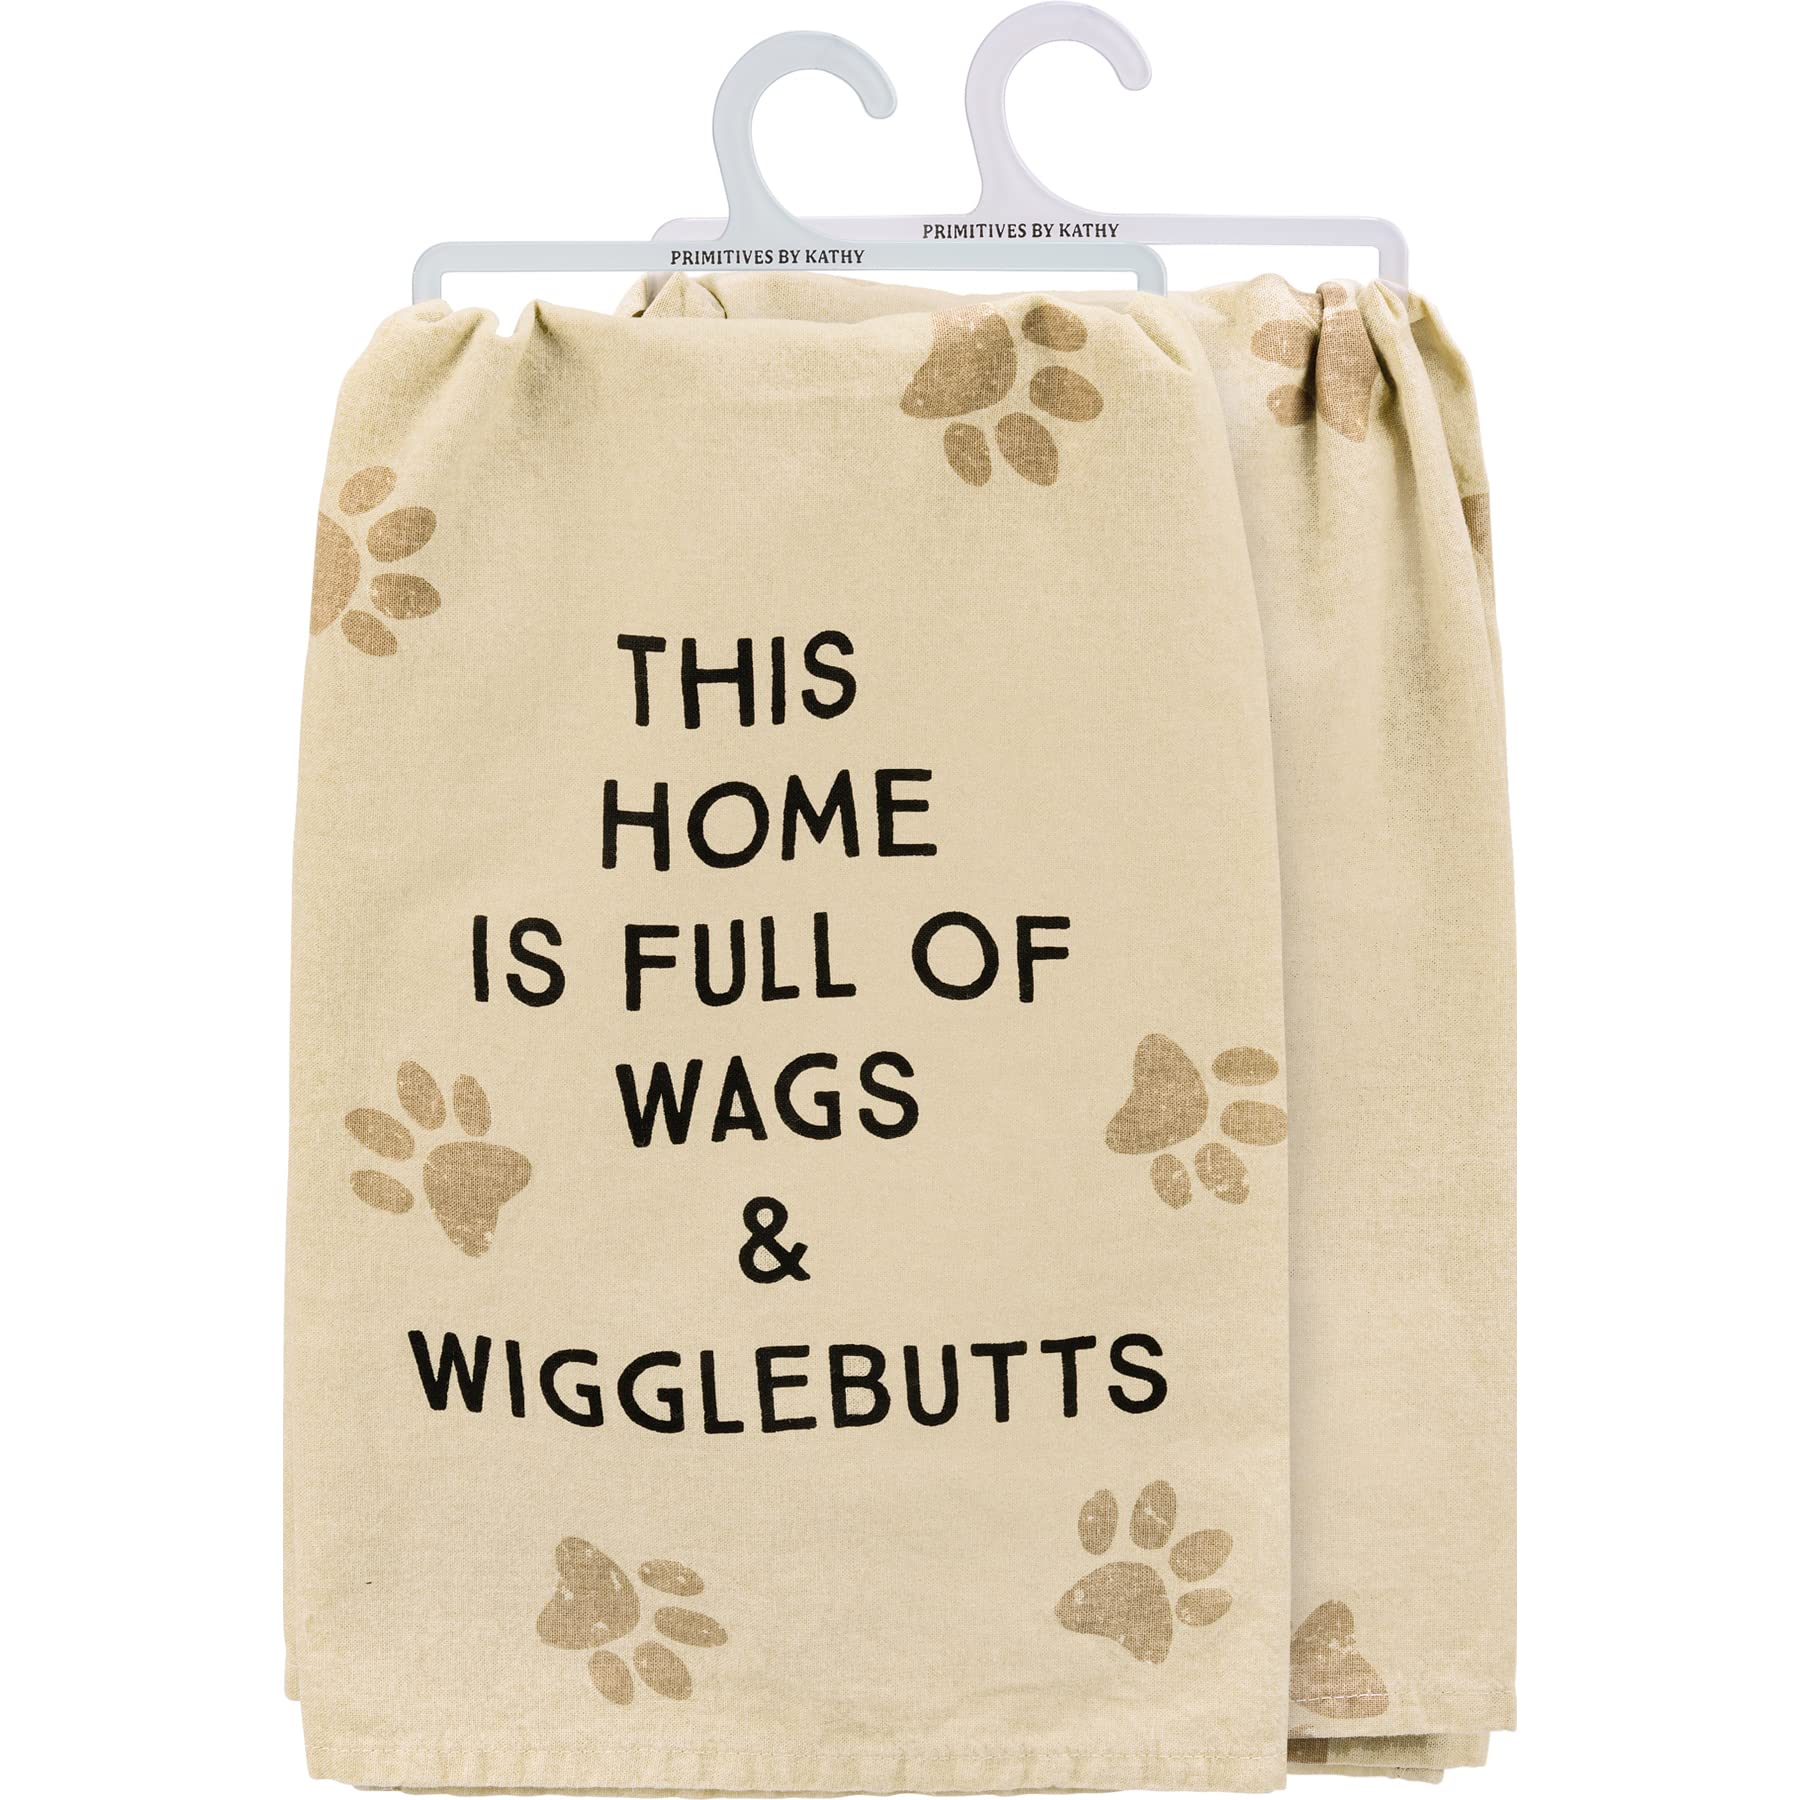 Primitives by Kathy This Home is Full of Wags & Wigglebutts Kitchen Towel